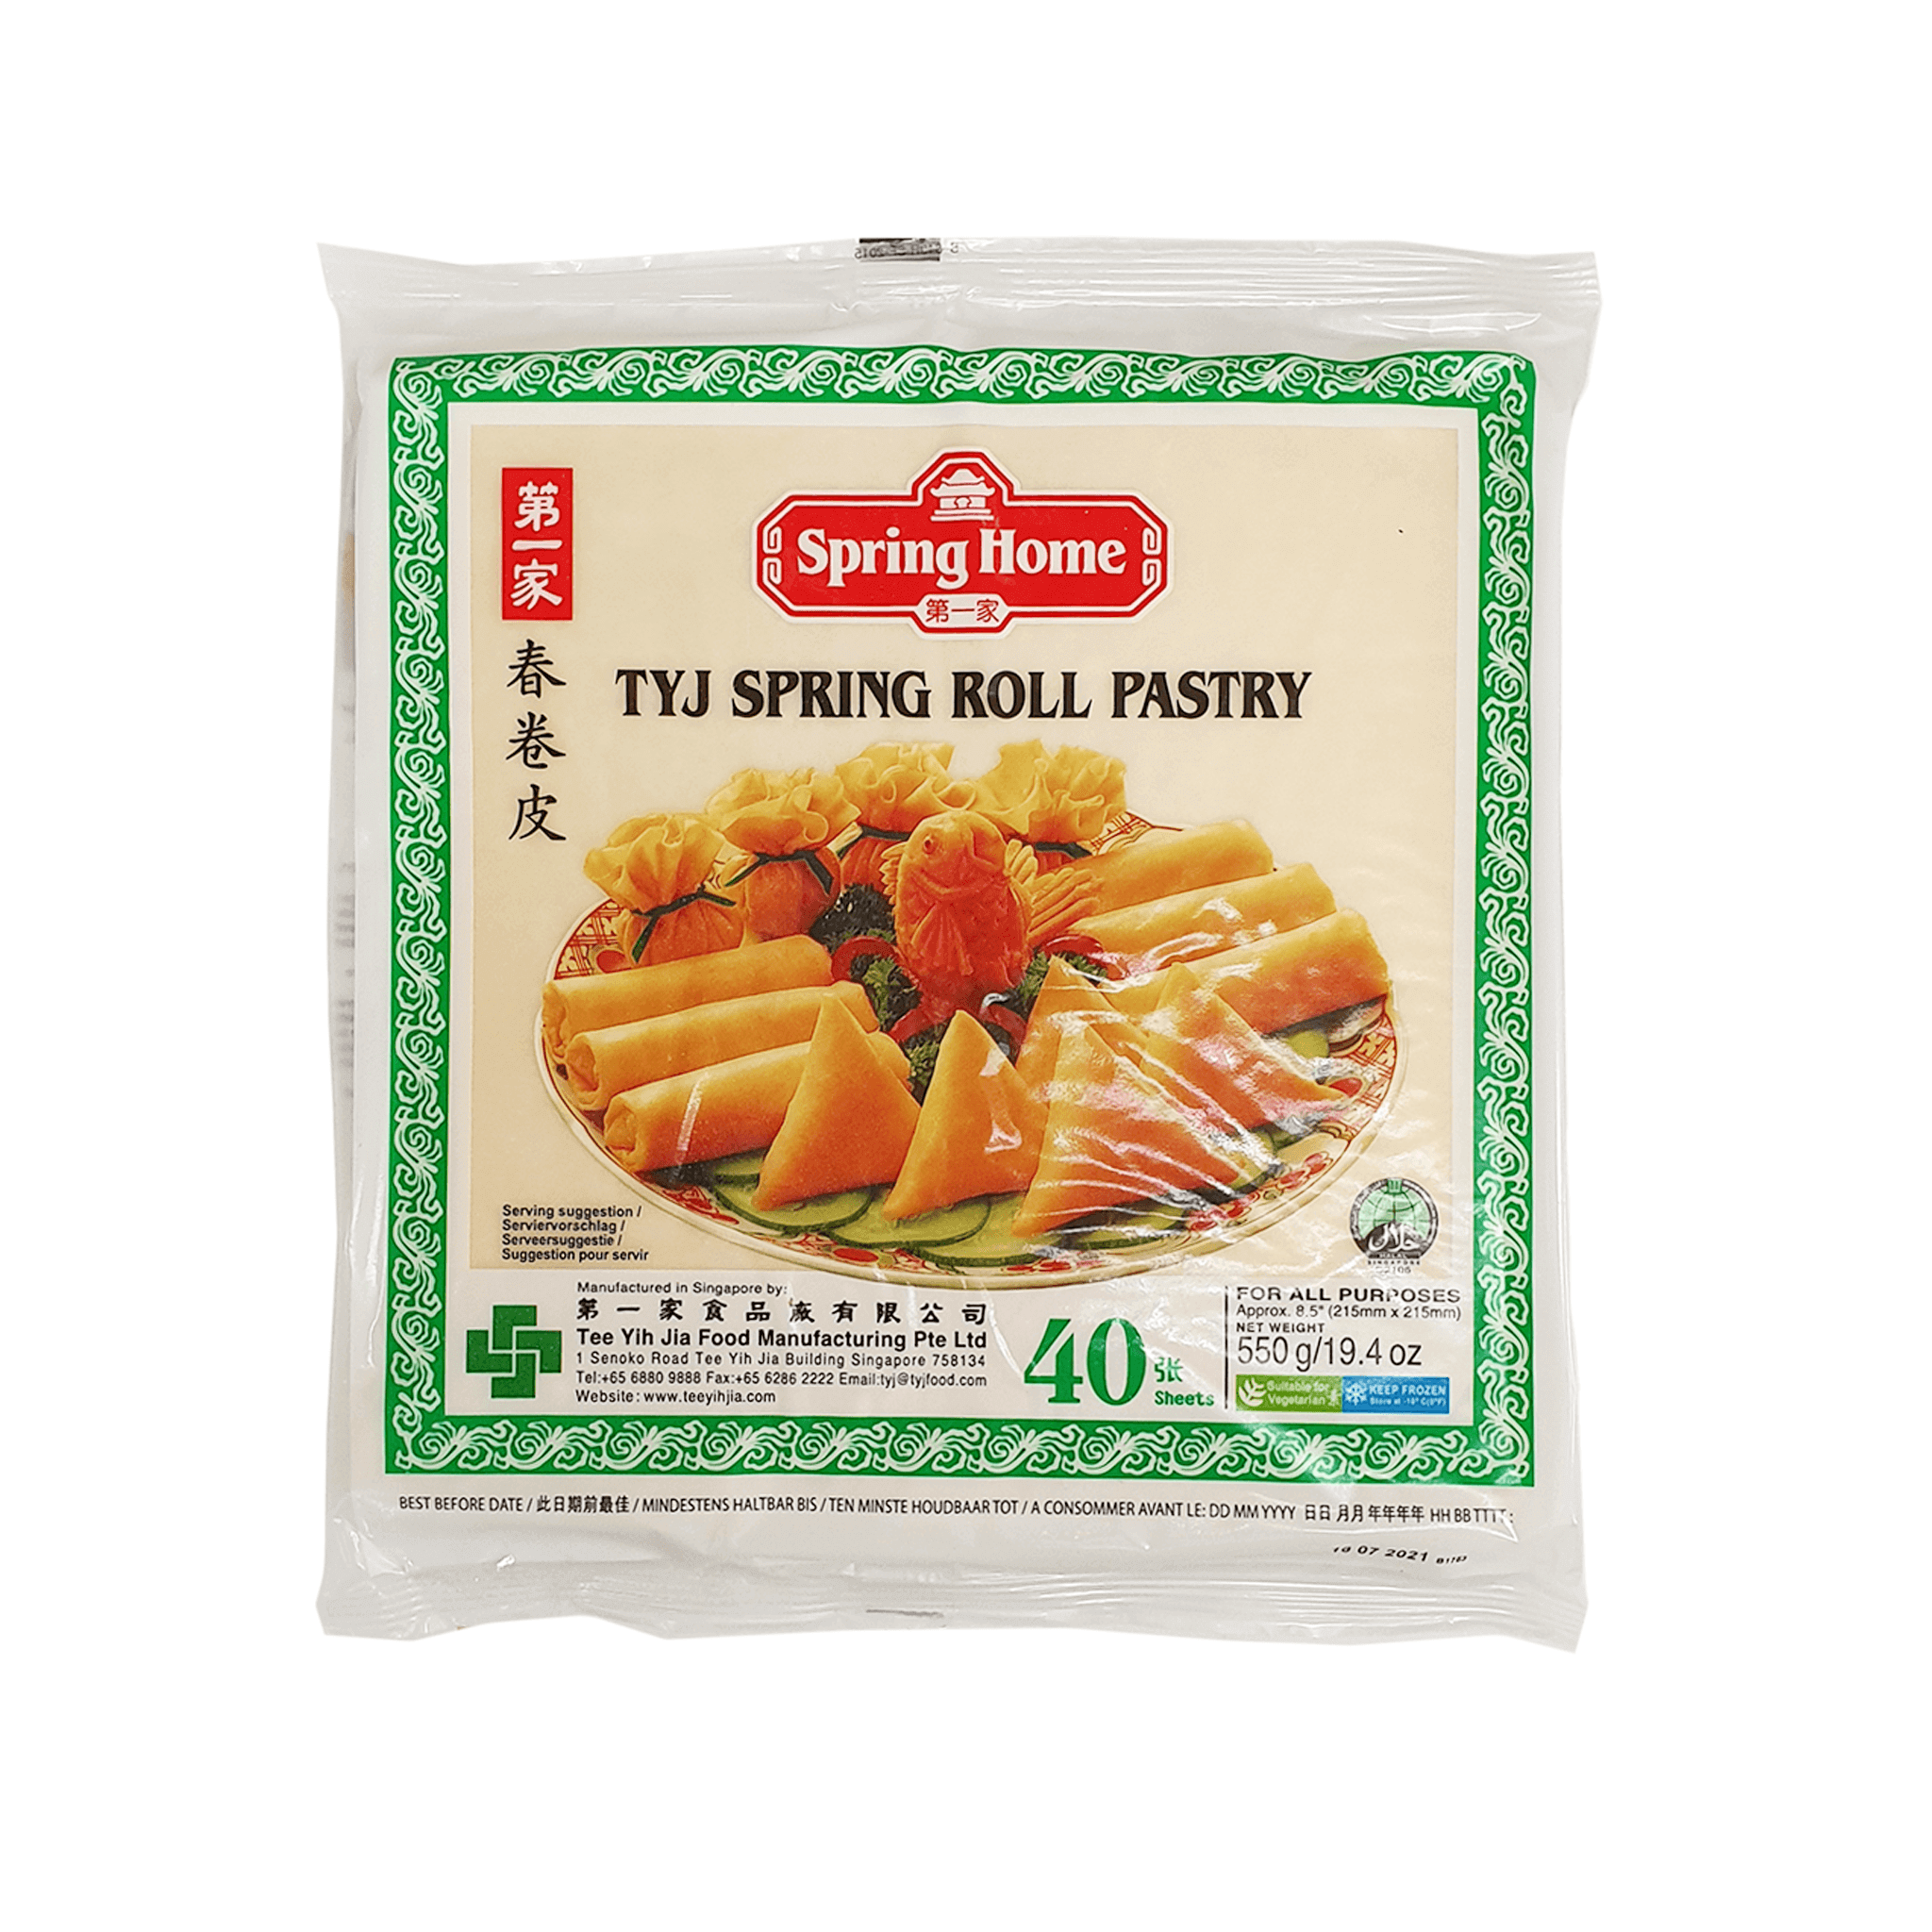 Frozen TYJ Spring Roll Pastry 8x8" (215x215mm) 40 Sheets 550g by Spring Home